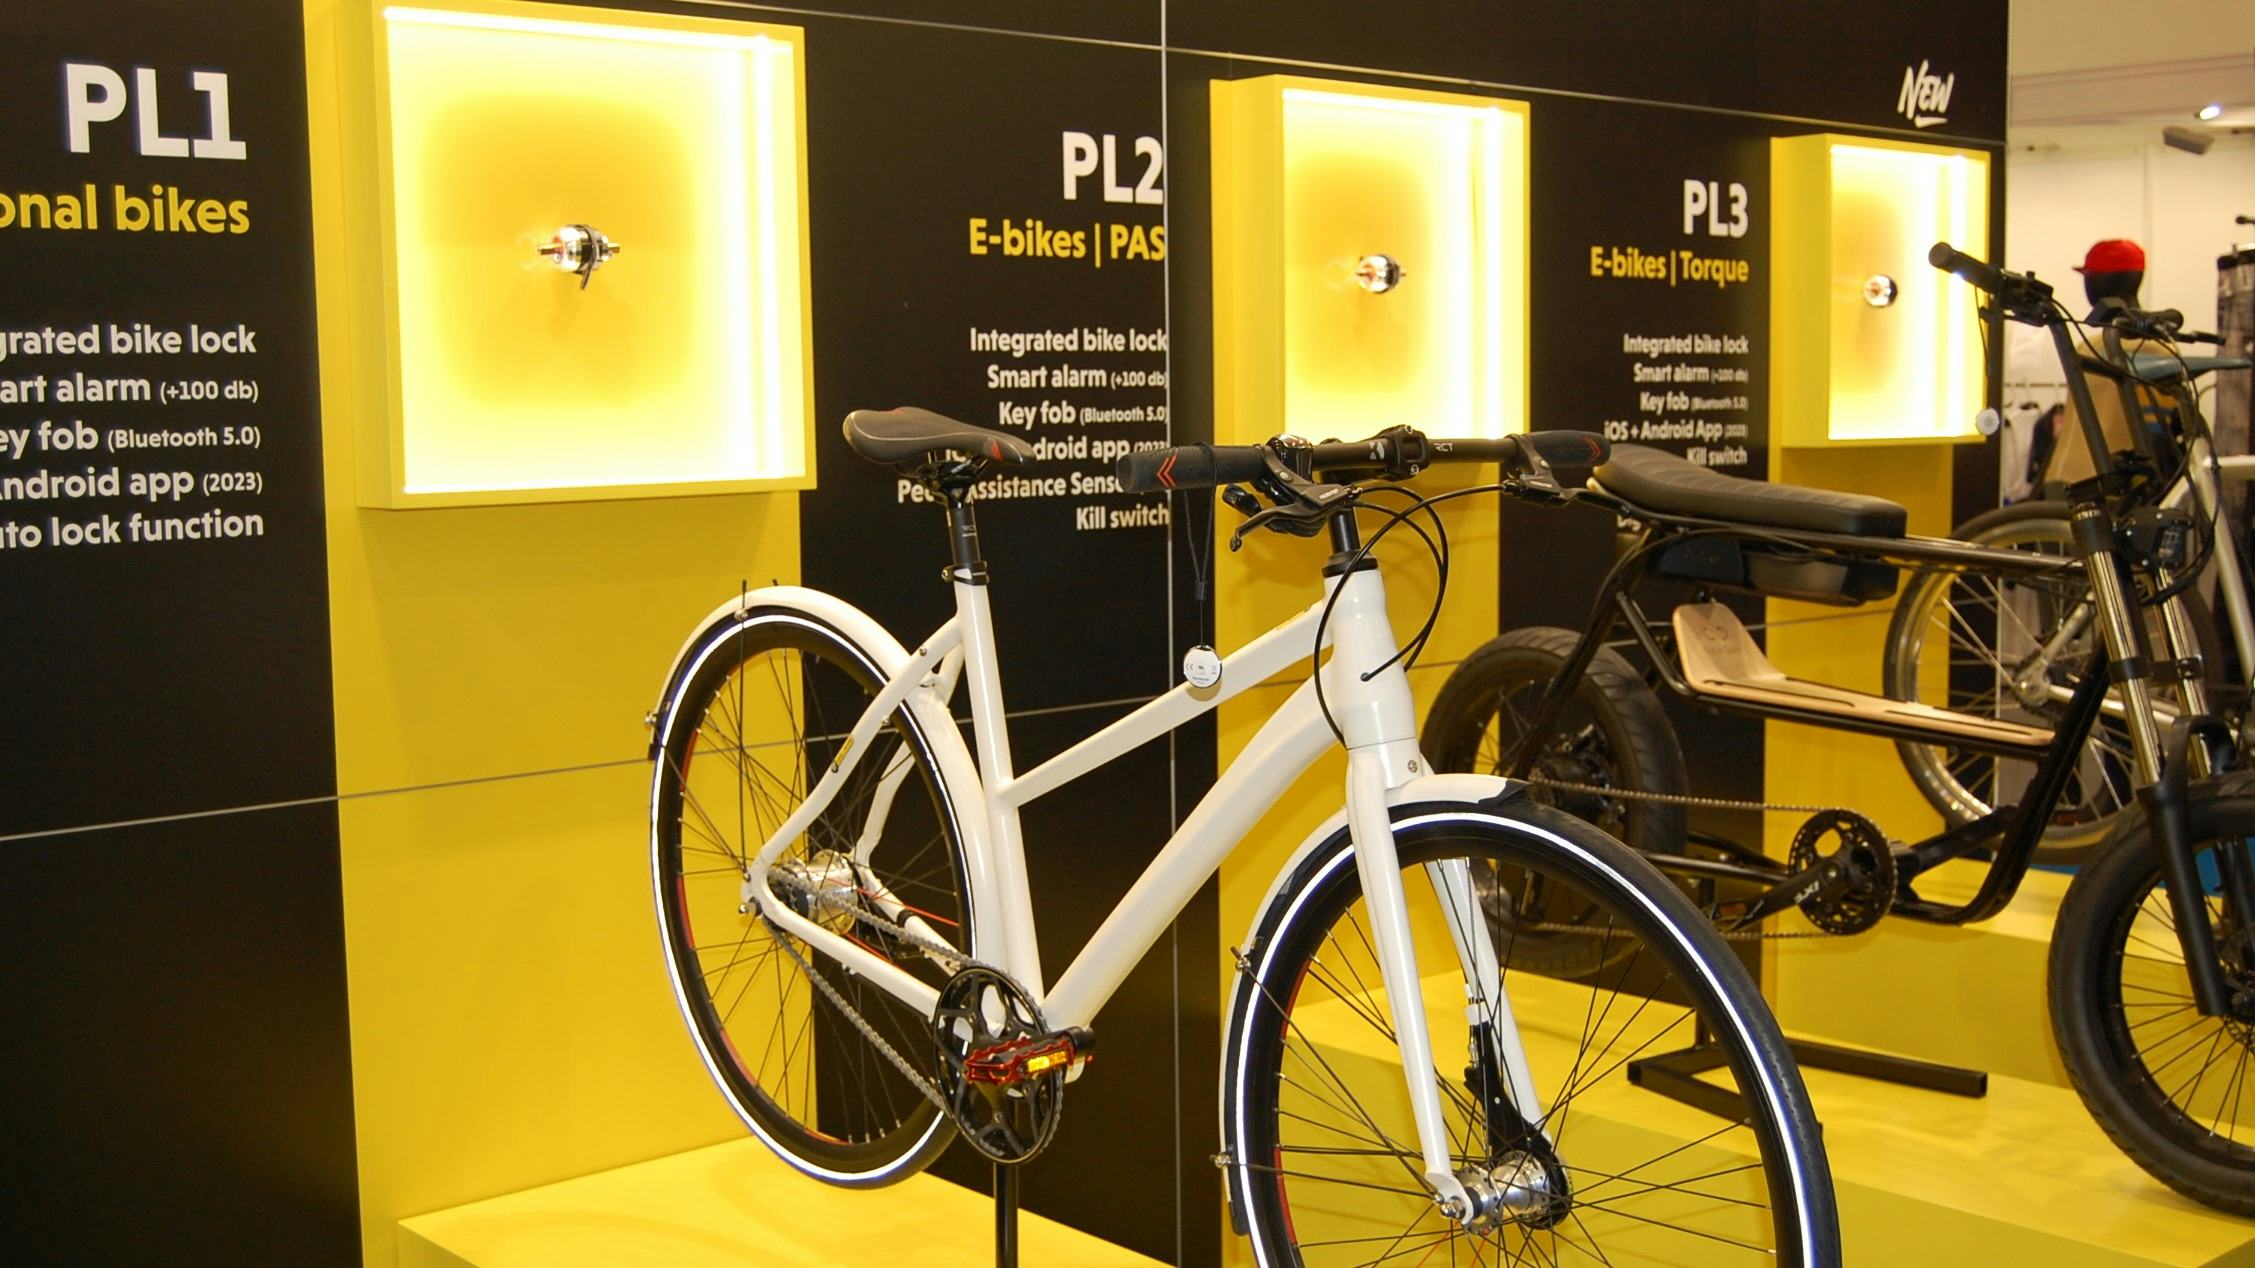 On display at Eurobike this year, the 3 integrated lock systems of Pentalock. – Photo Bike Europe